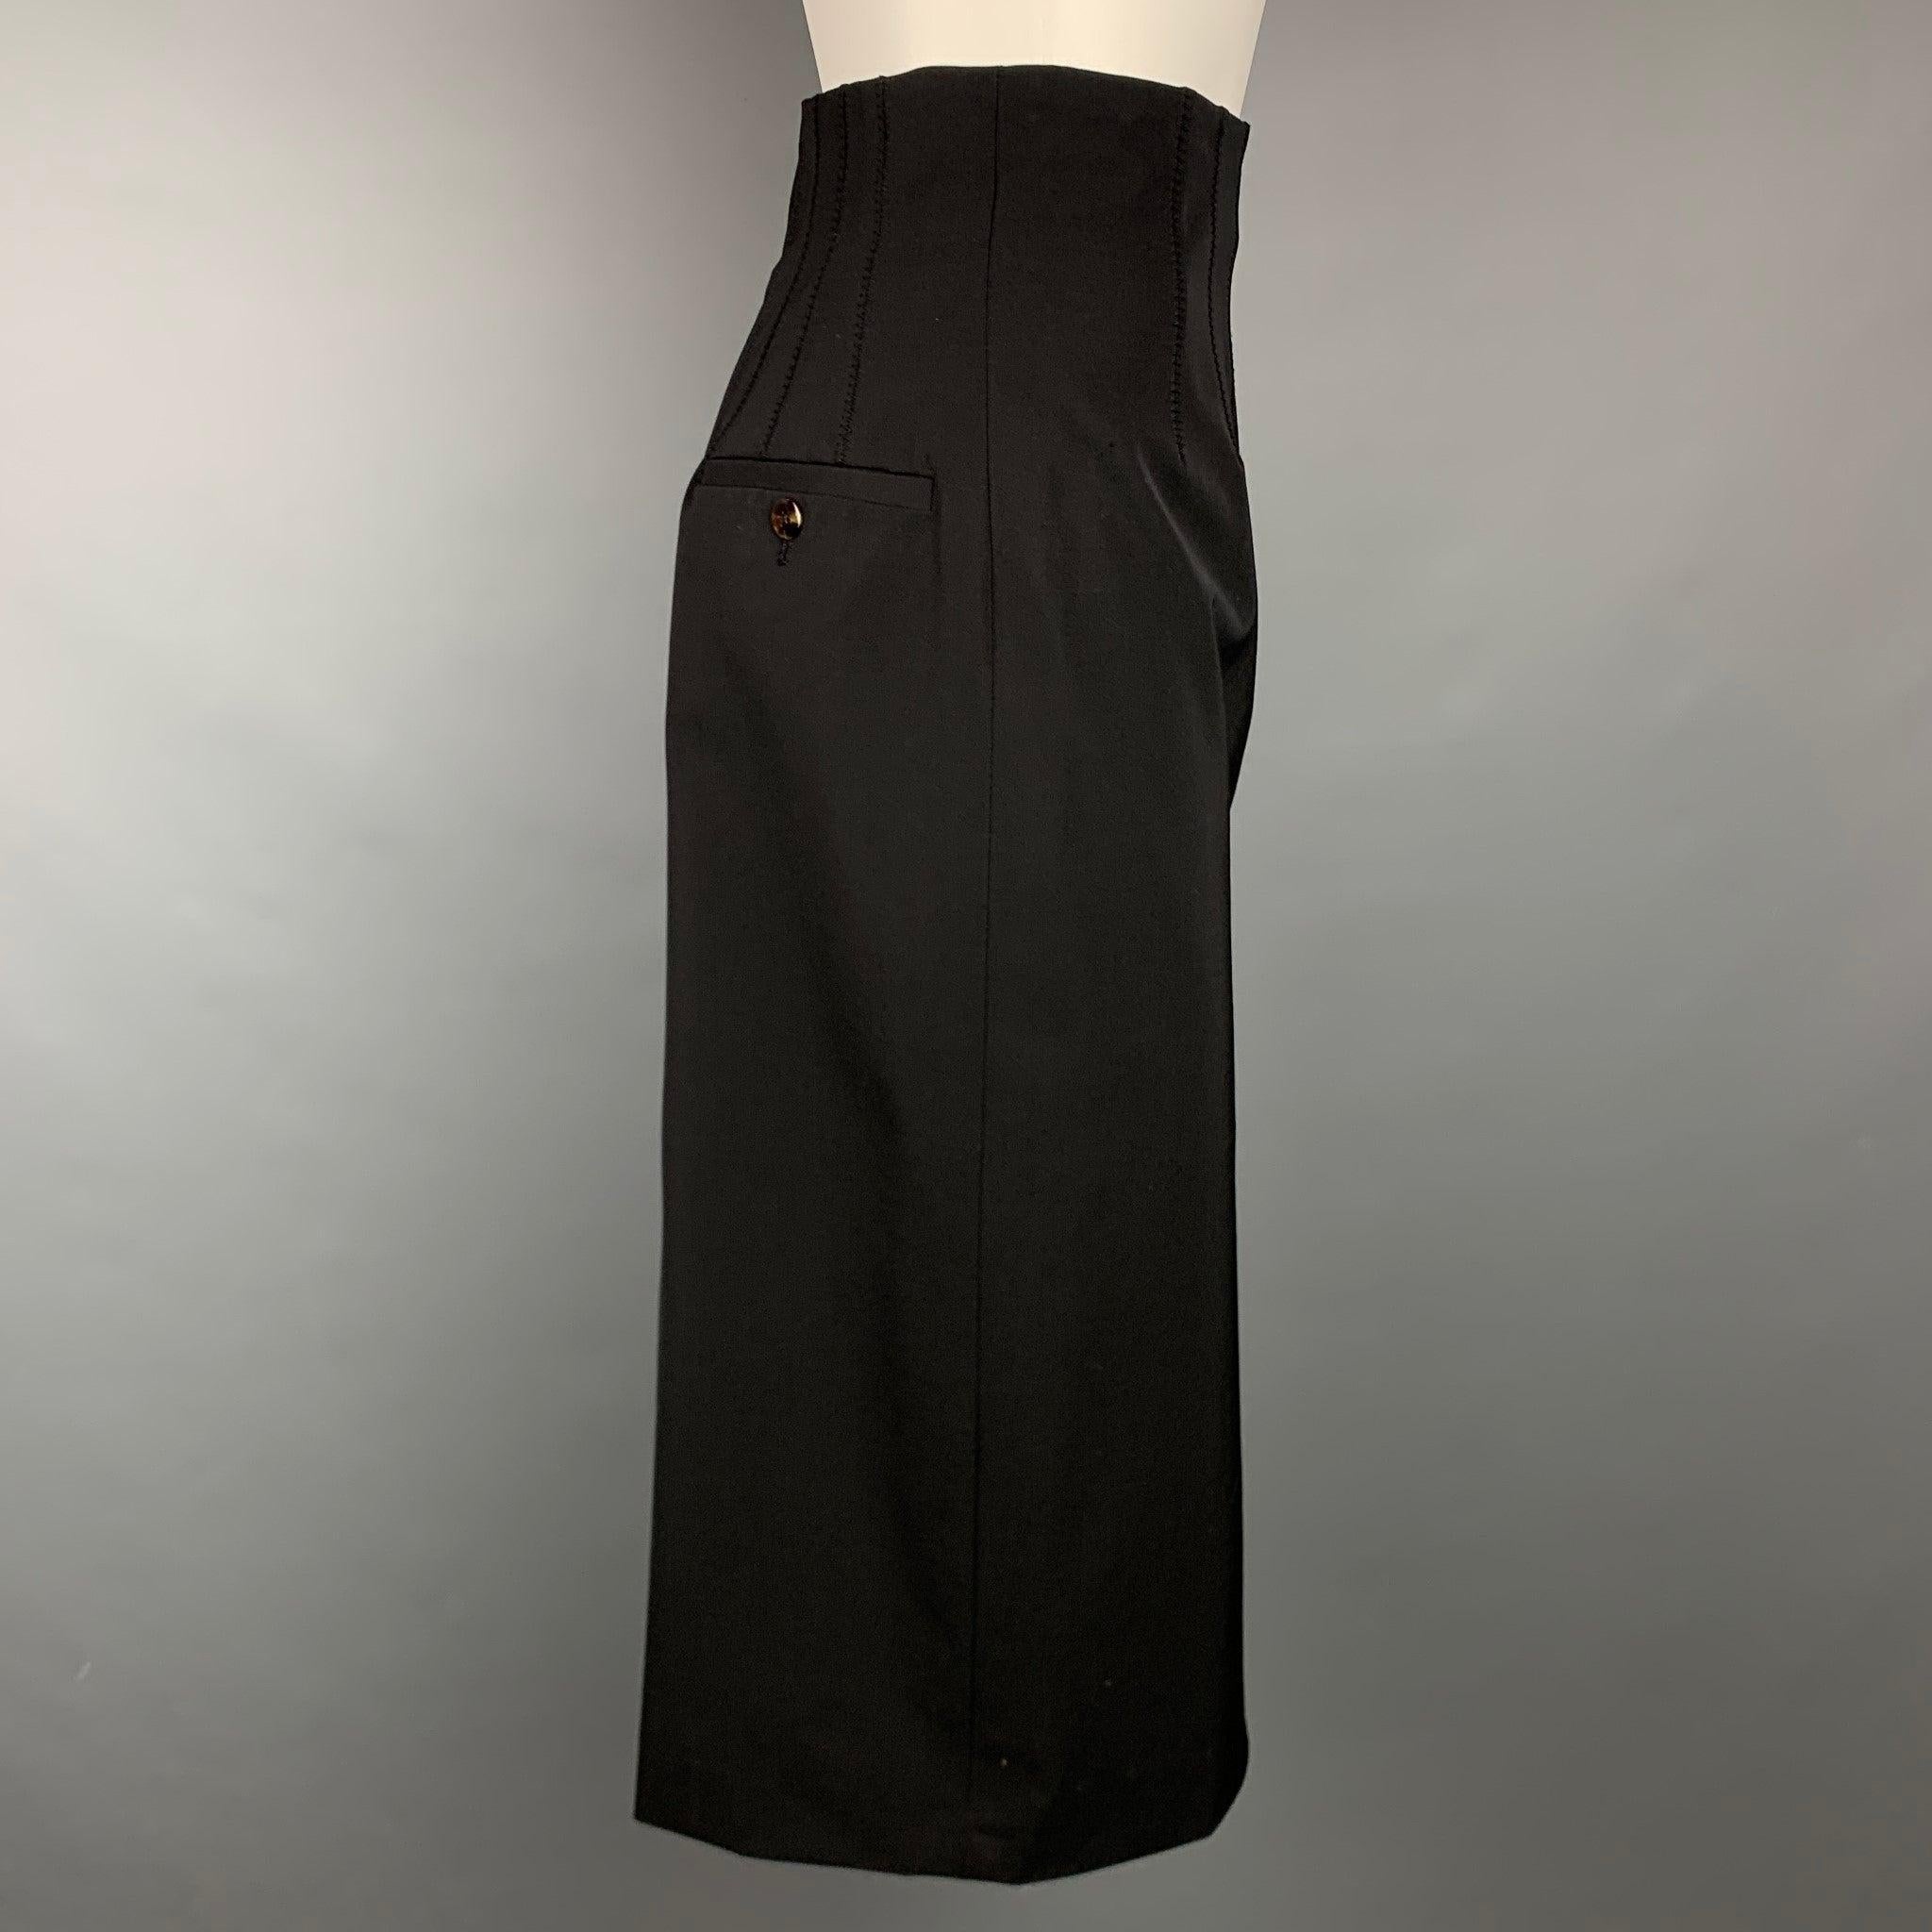 JEAN PAUL GAULTIER Reedition 1993/1994 skirt comes in a black wool / polyester with a slip liner featuring a high waisted style, front pleats, back double front tabs, and a back zipper closure. Made in Italy.Very Good
Pre-Owned Condition. 

Marked: 